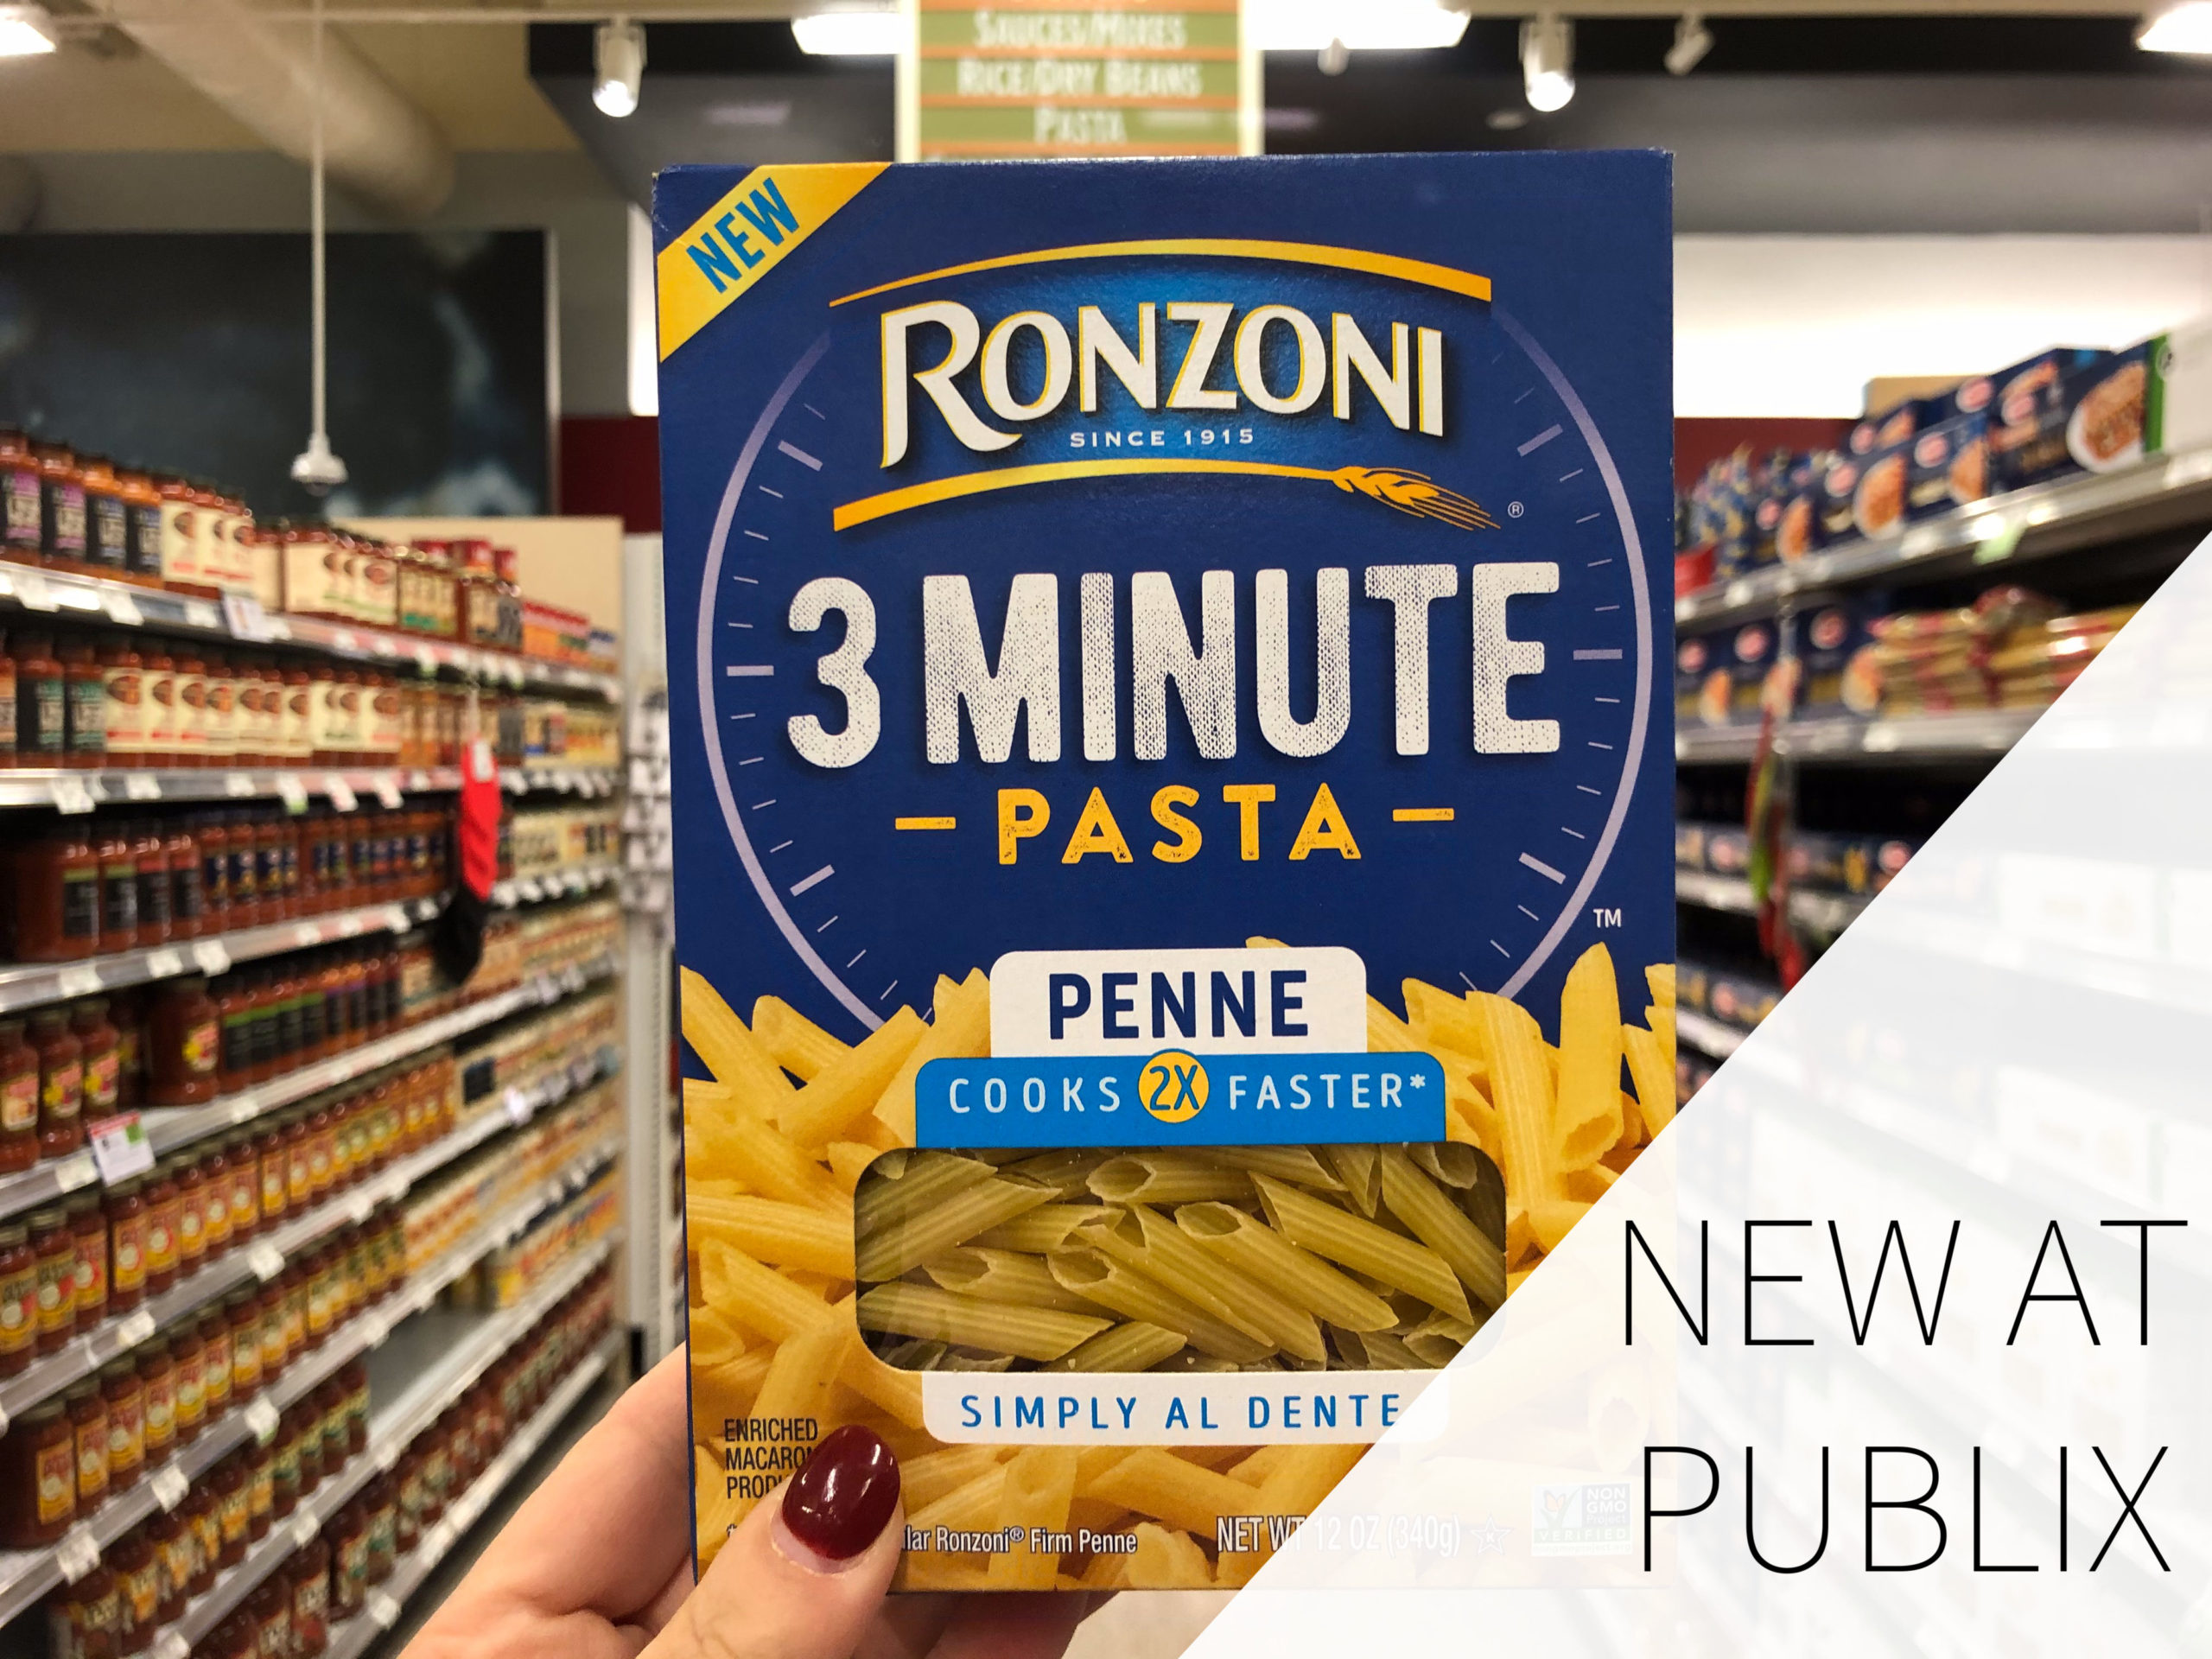 Ronzoni 3 Minute Pasta Is Buy One, Get One FREE At Publix - Stock Up On Tasty Pasta! on I Heart Publix 1